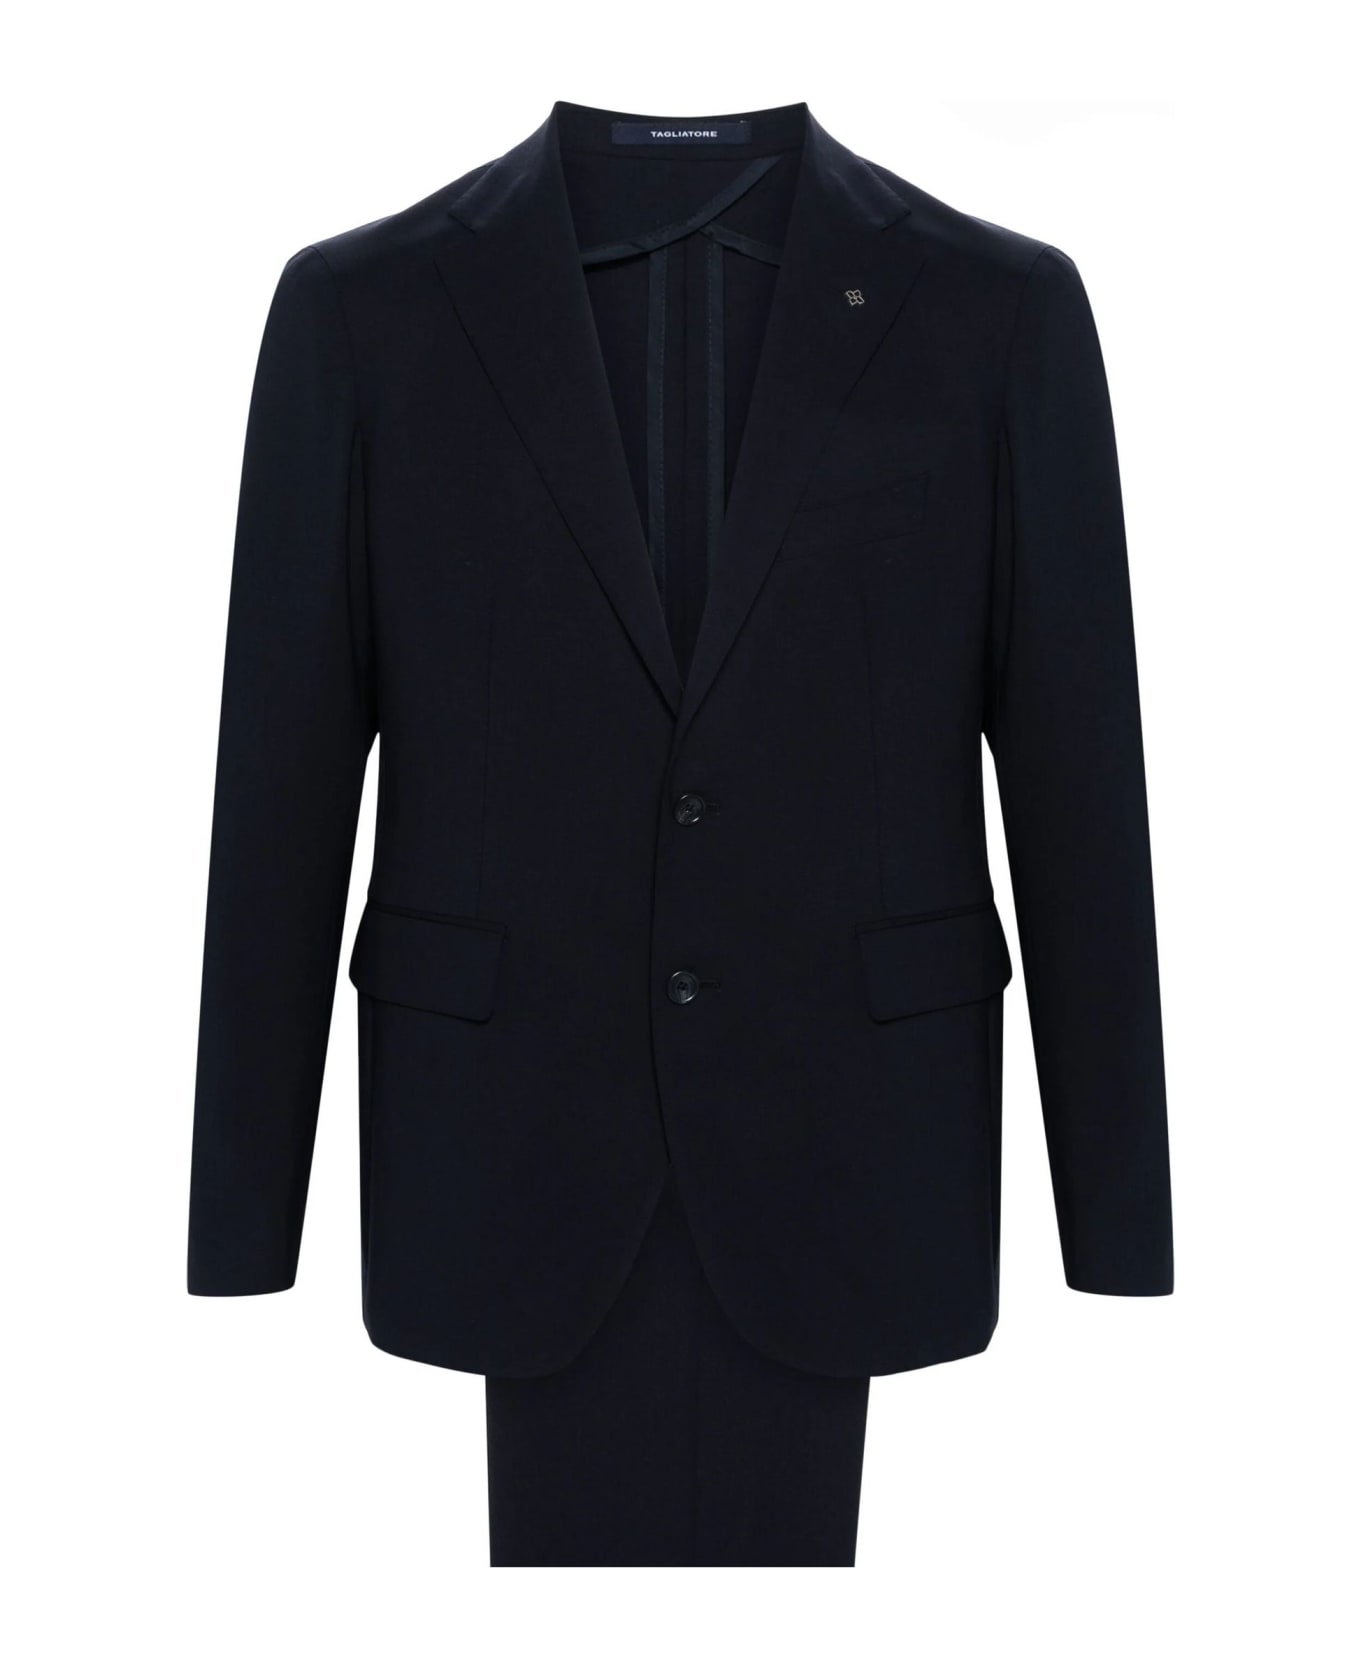 Tagliatore Navy Blue Single-breasted Wool Suit - Blue スーツ